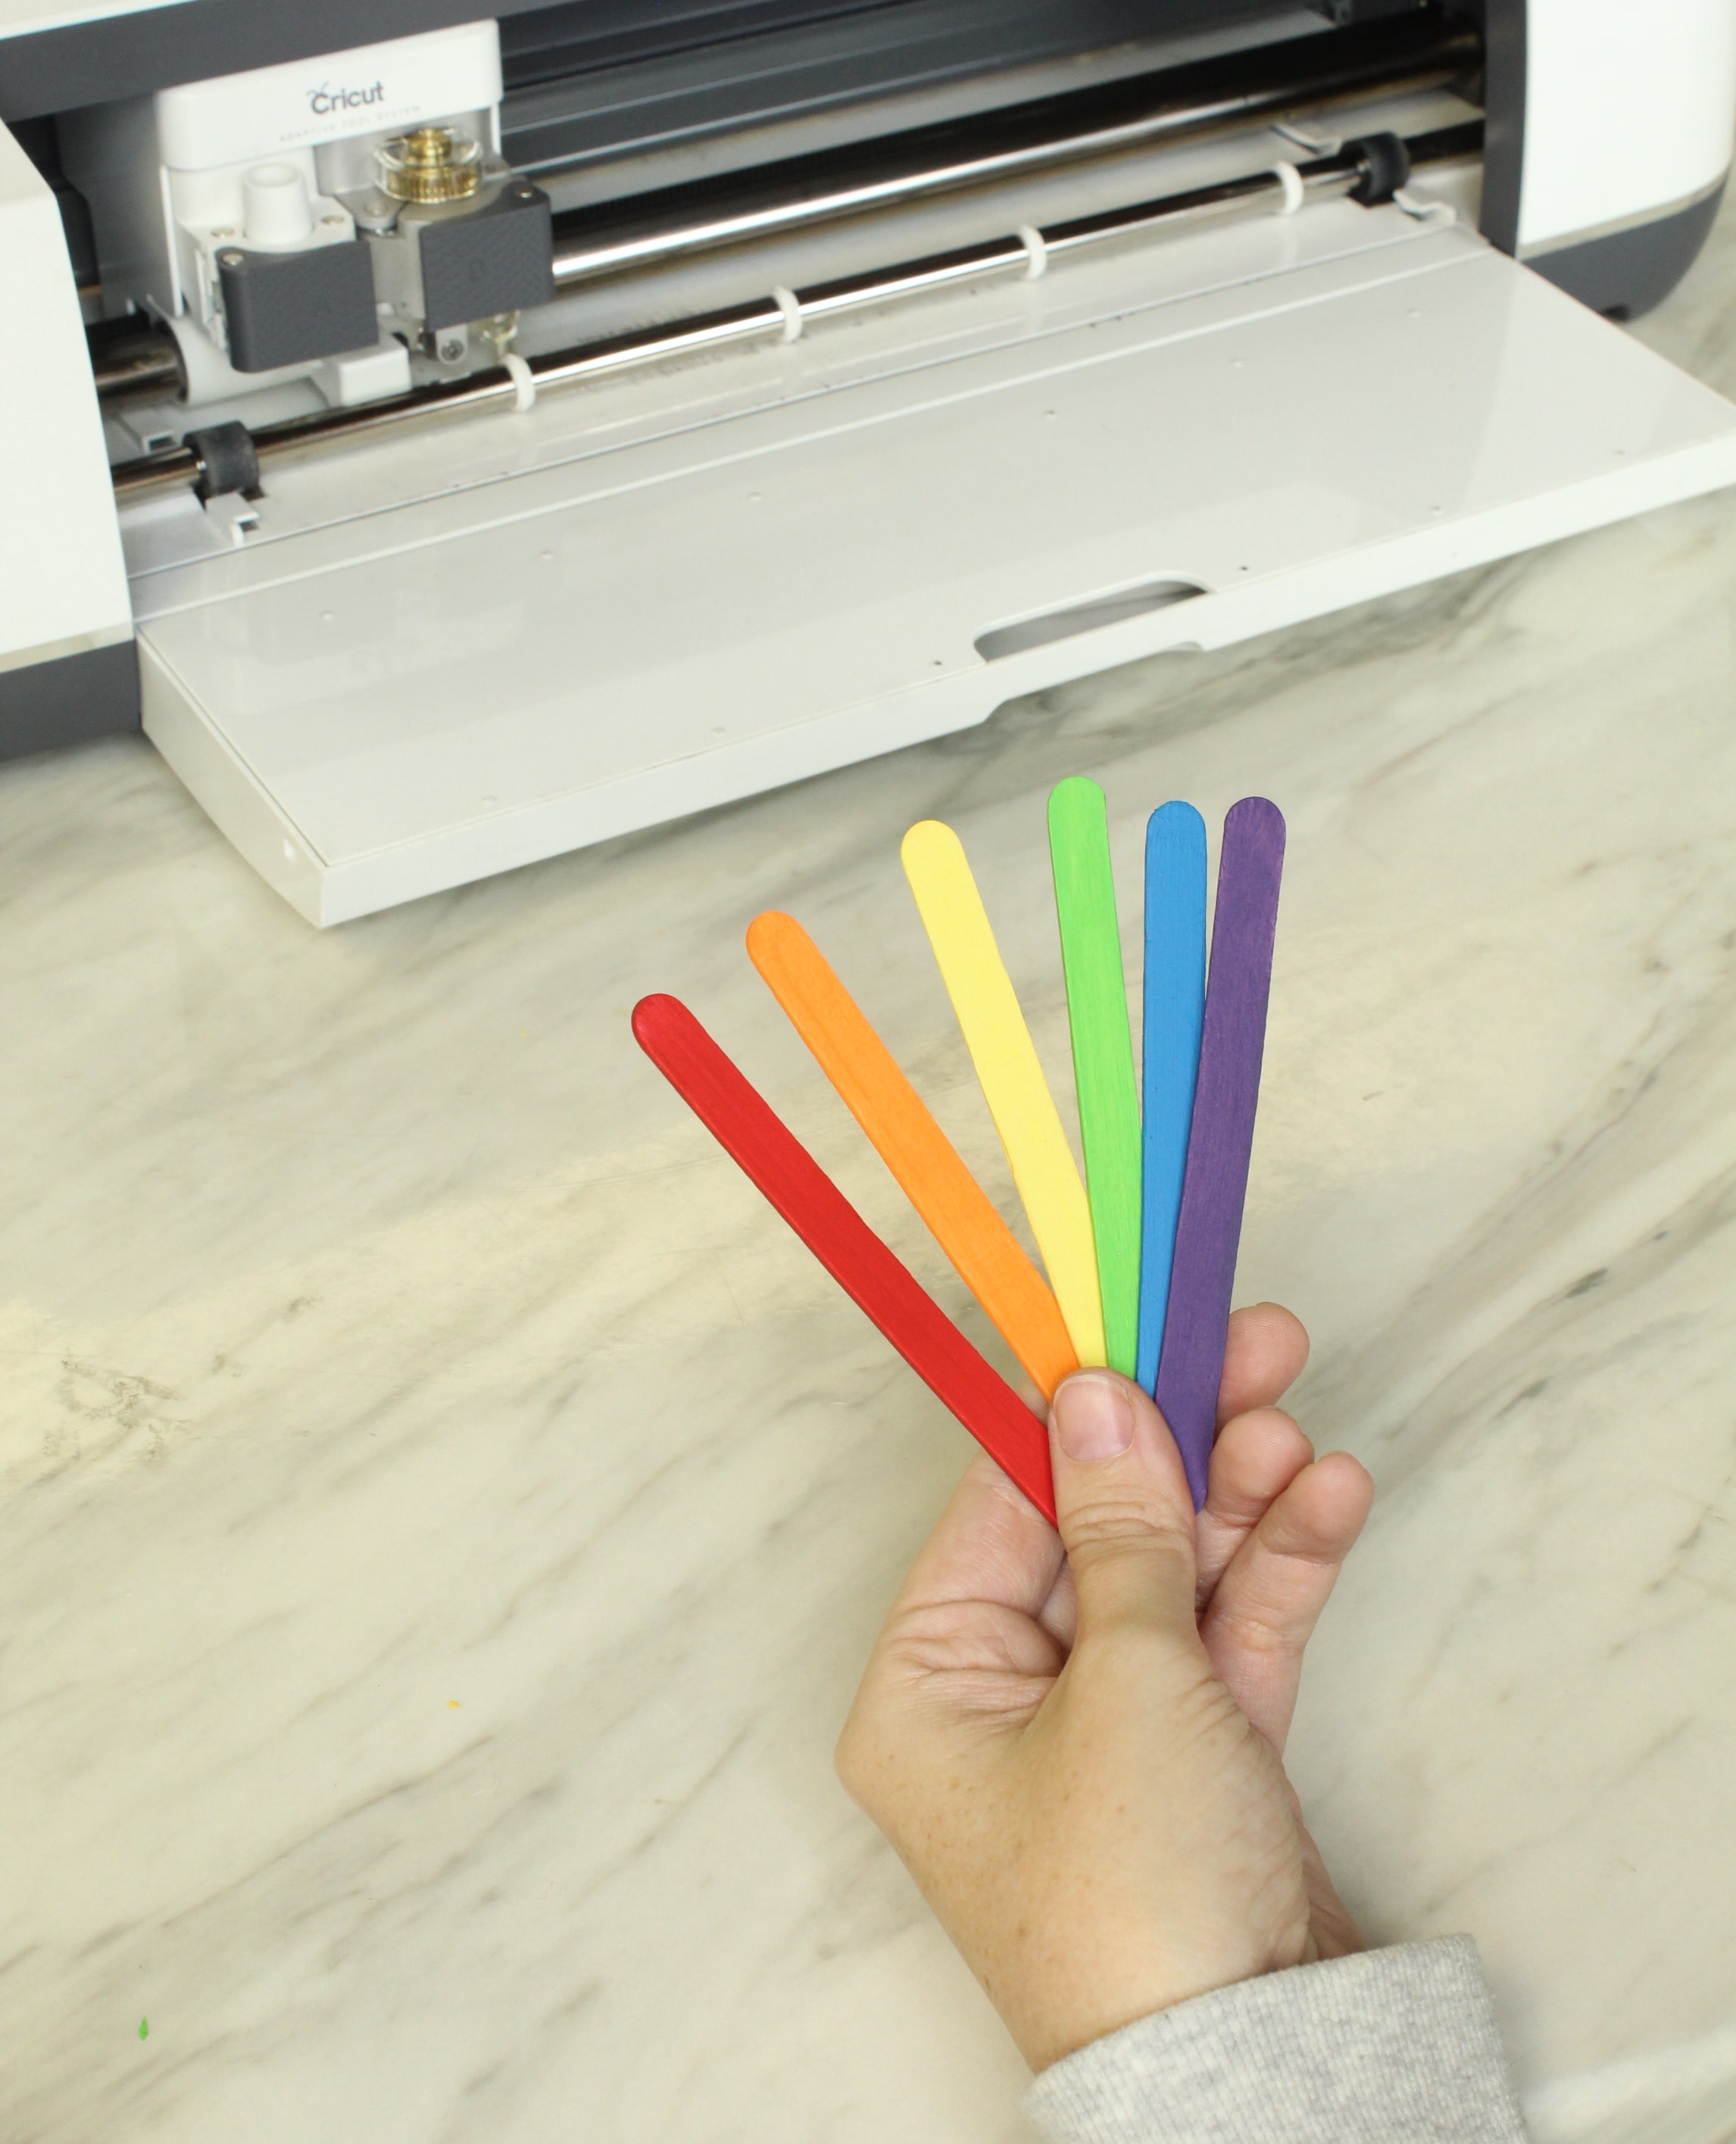 Your little one will have SO much fun learning their colors with this DIY felt popsicle color matching activity!